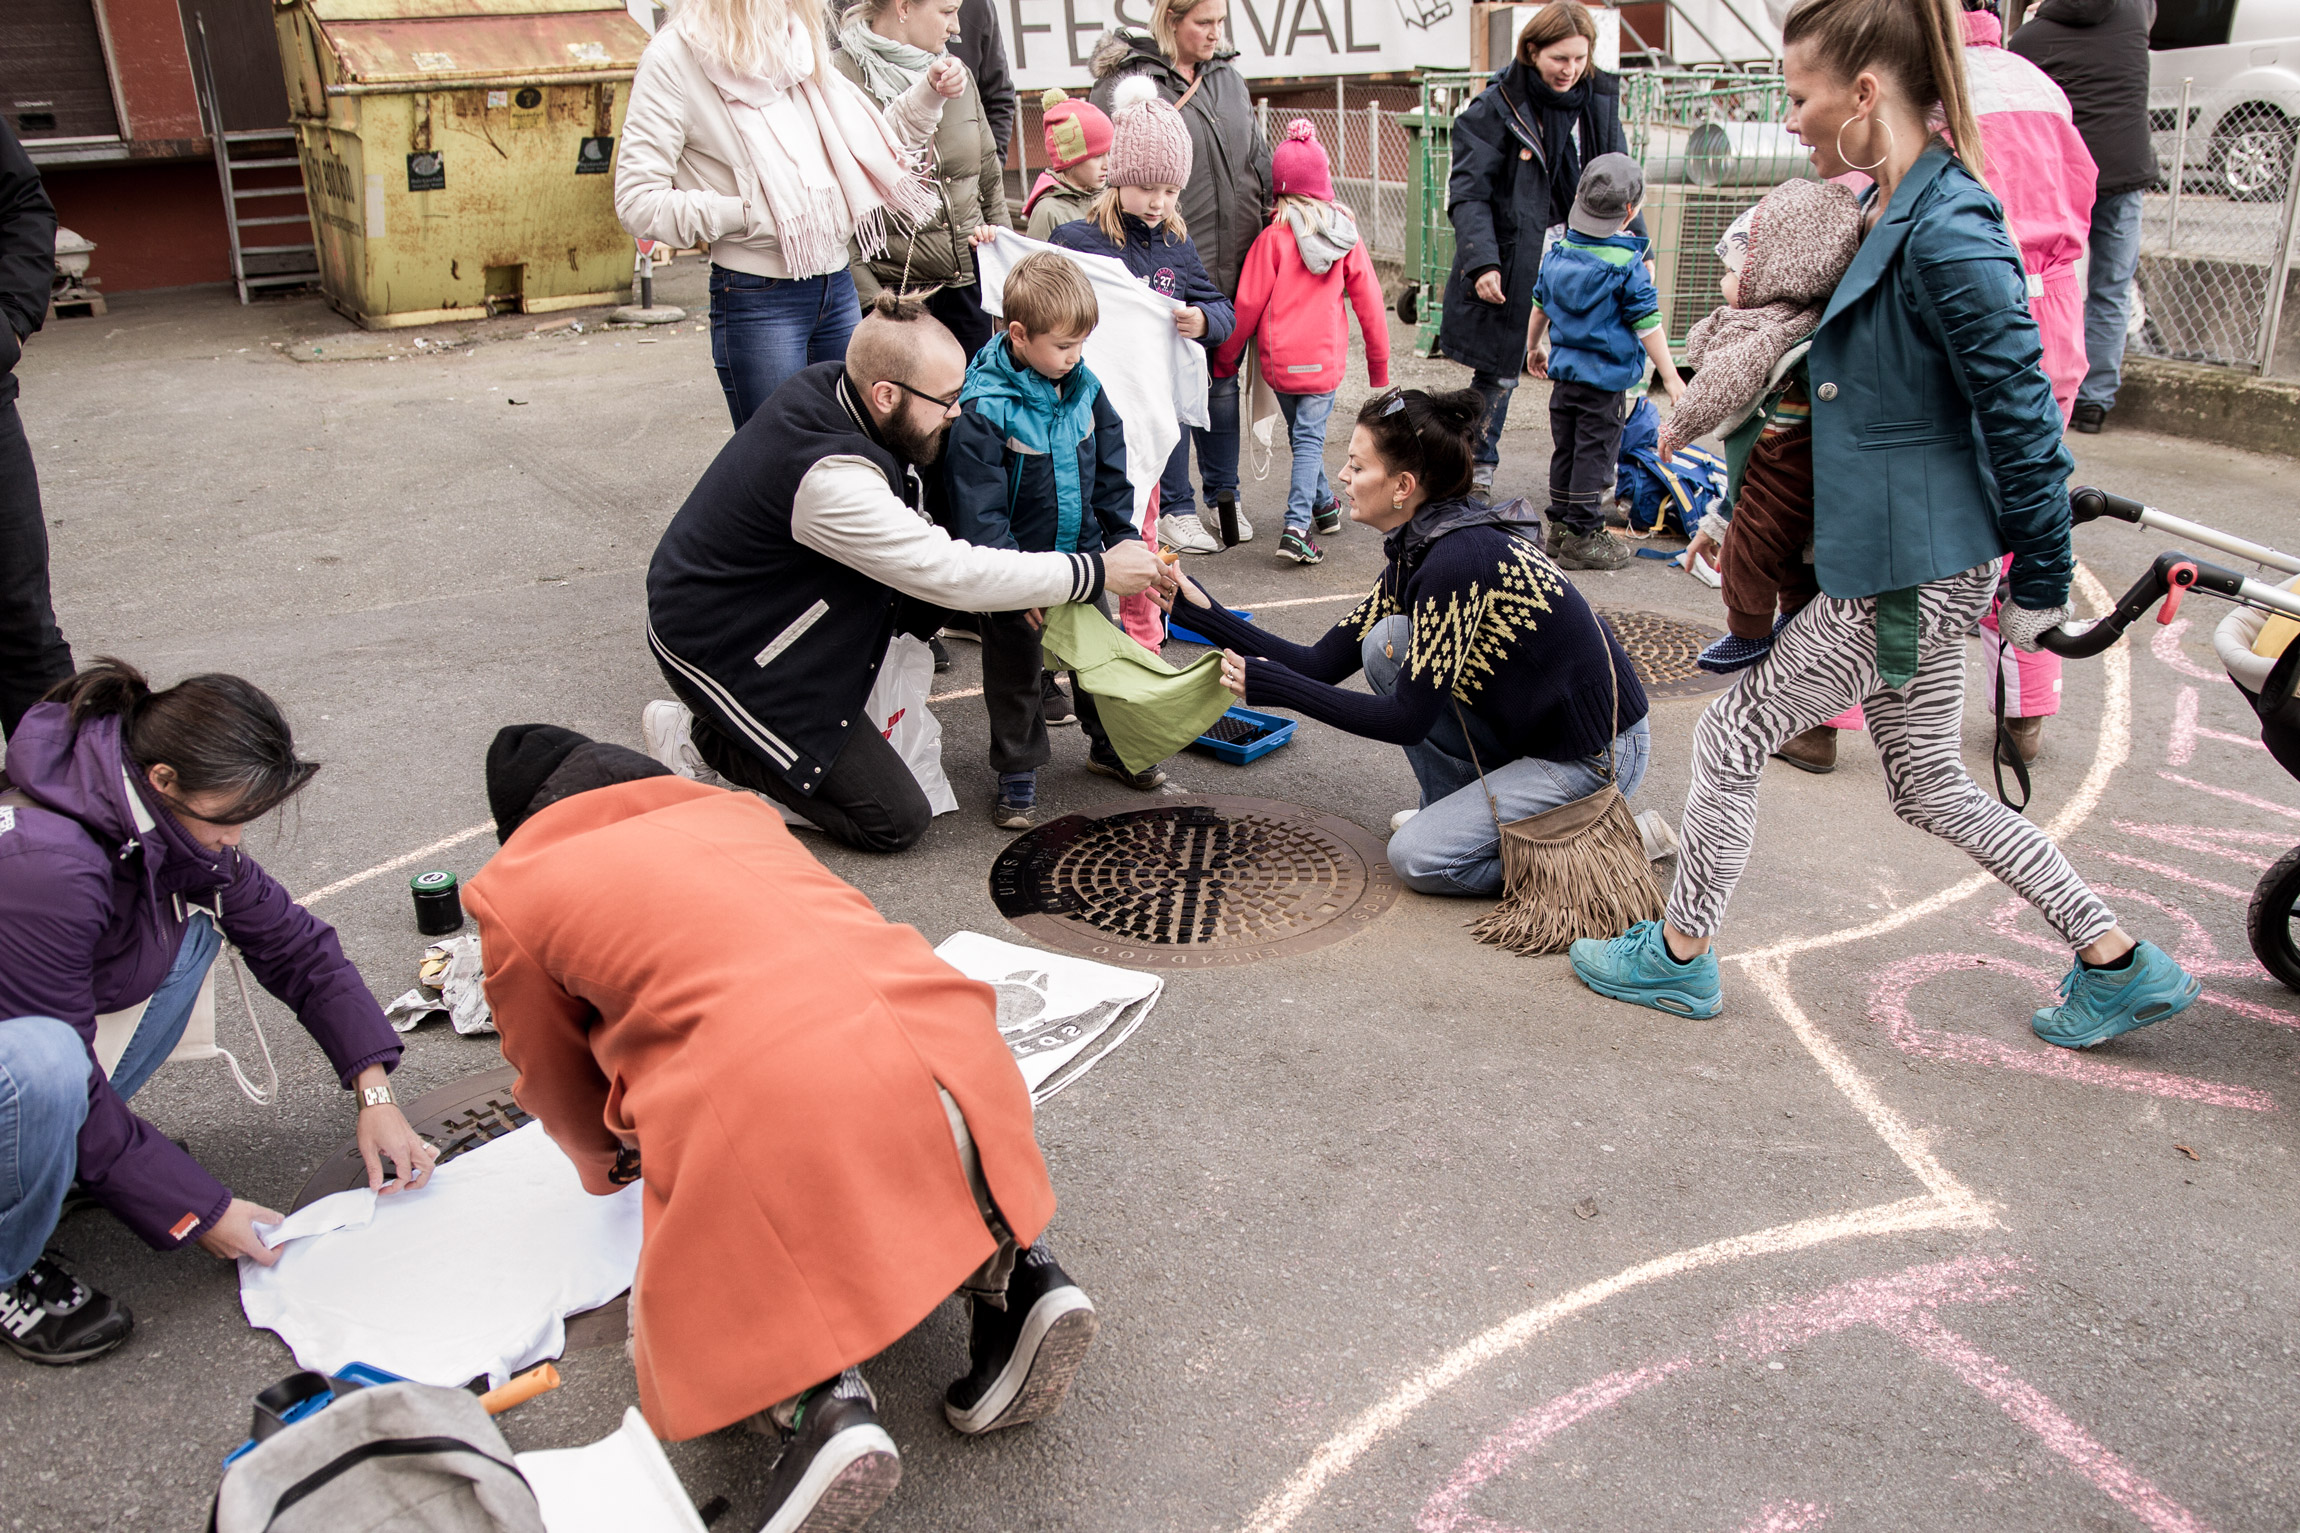 raubdruckerin is hosting regular ‘street printing’ workshops at selected events, festivals and neighborhood fiestas with focus on creative exchange, encouraging involvement of people of all ages and backgrounds.